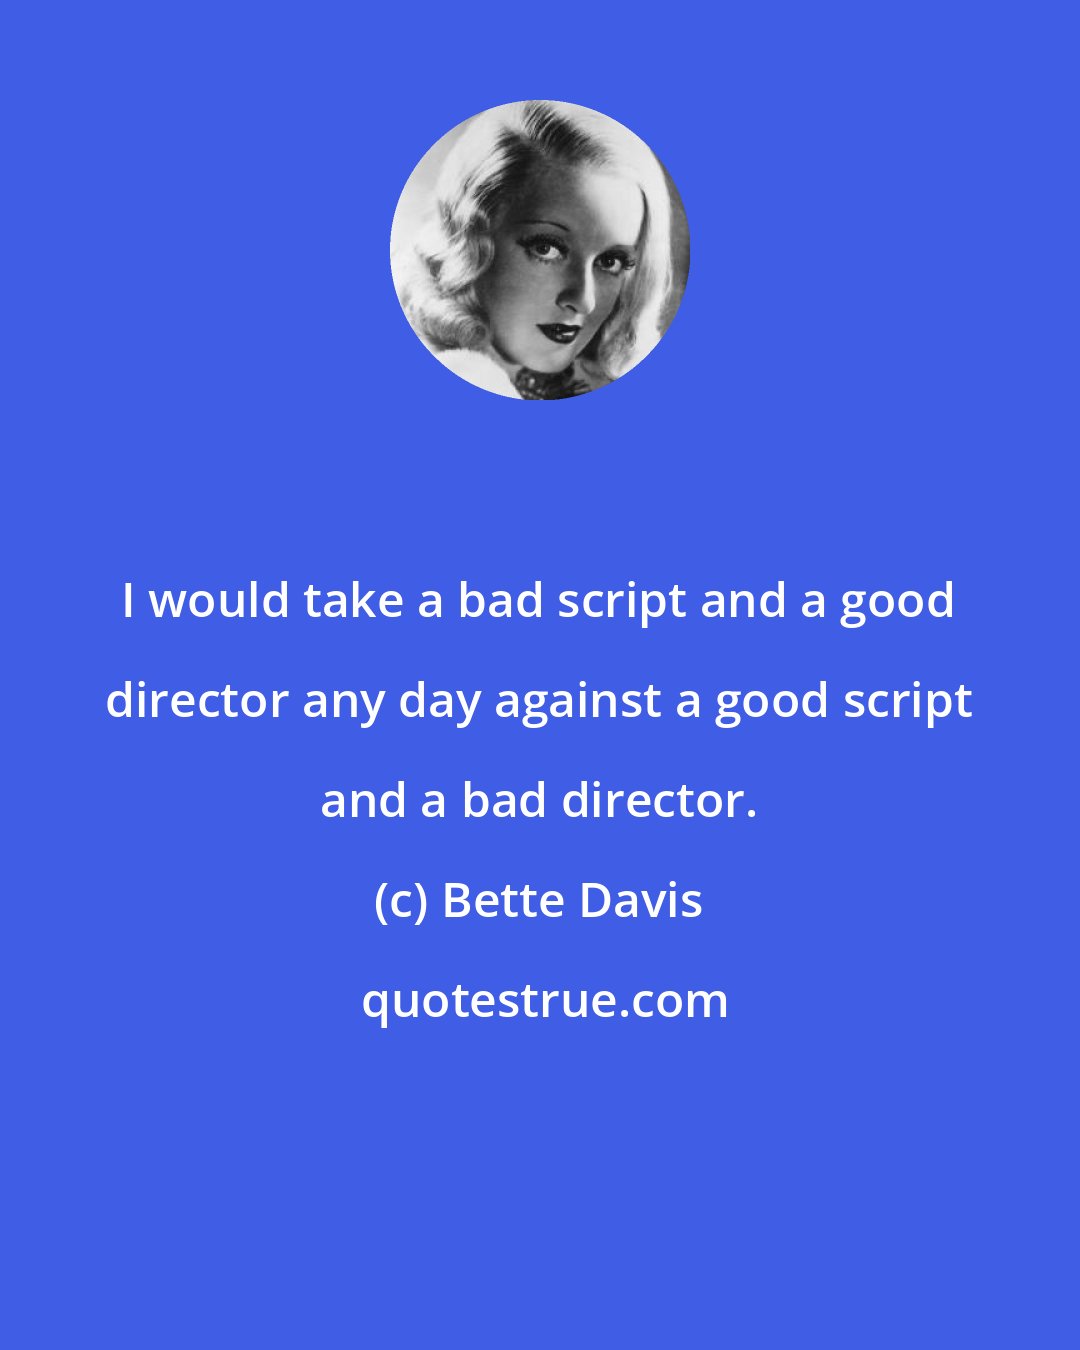 Bette Davis: I would take a bad script and a good director any day against a good script and a bad director.